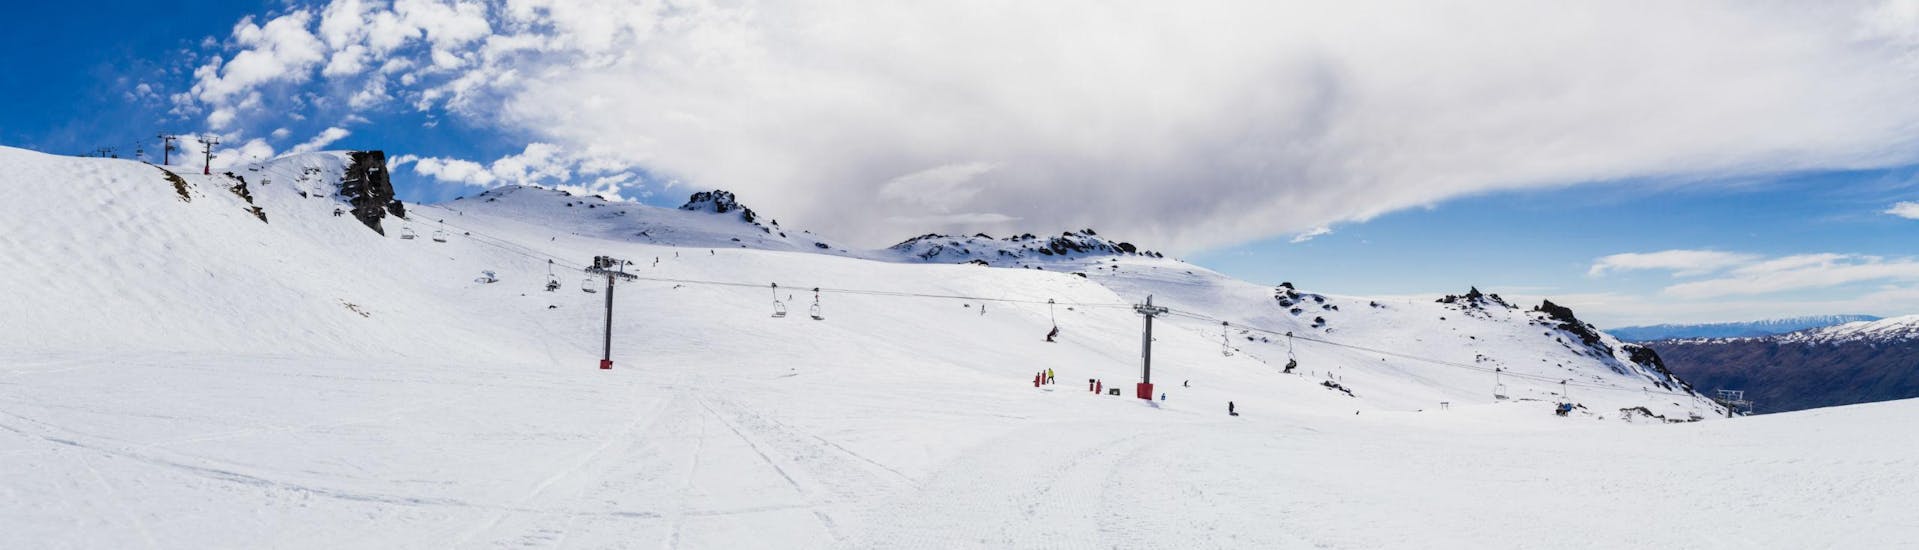 An image of the snow park in the Cardrona Alpine Resort close to Wanaka, where visitors can book ski lessons and learn to ski.